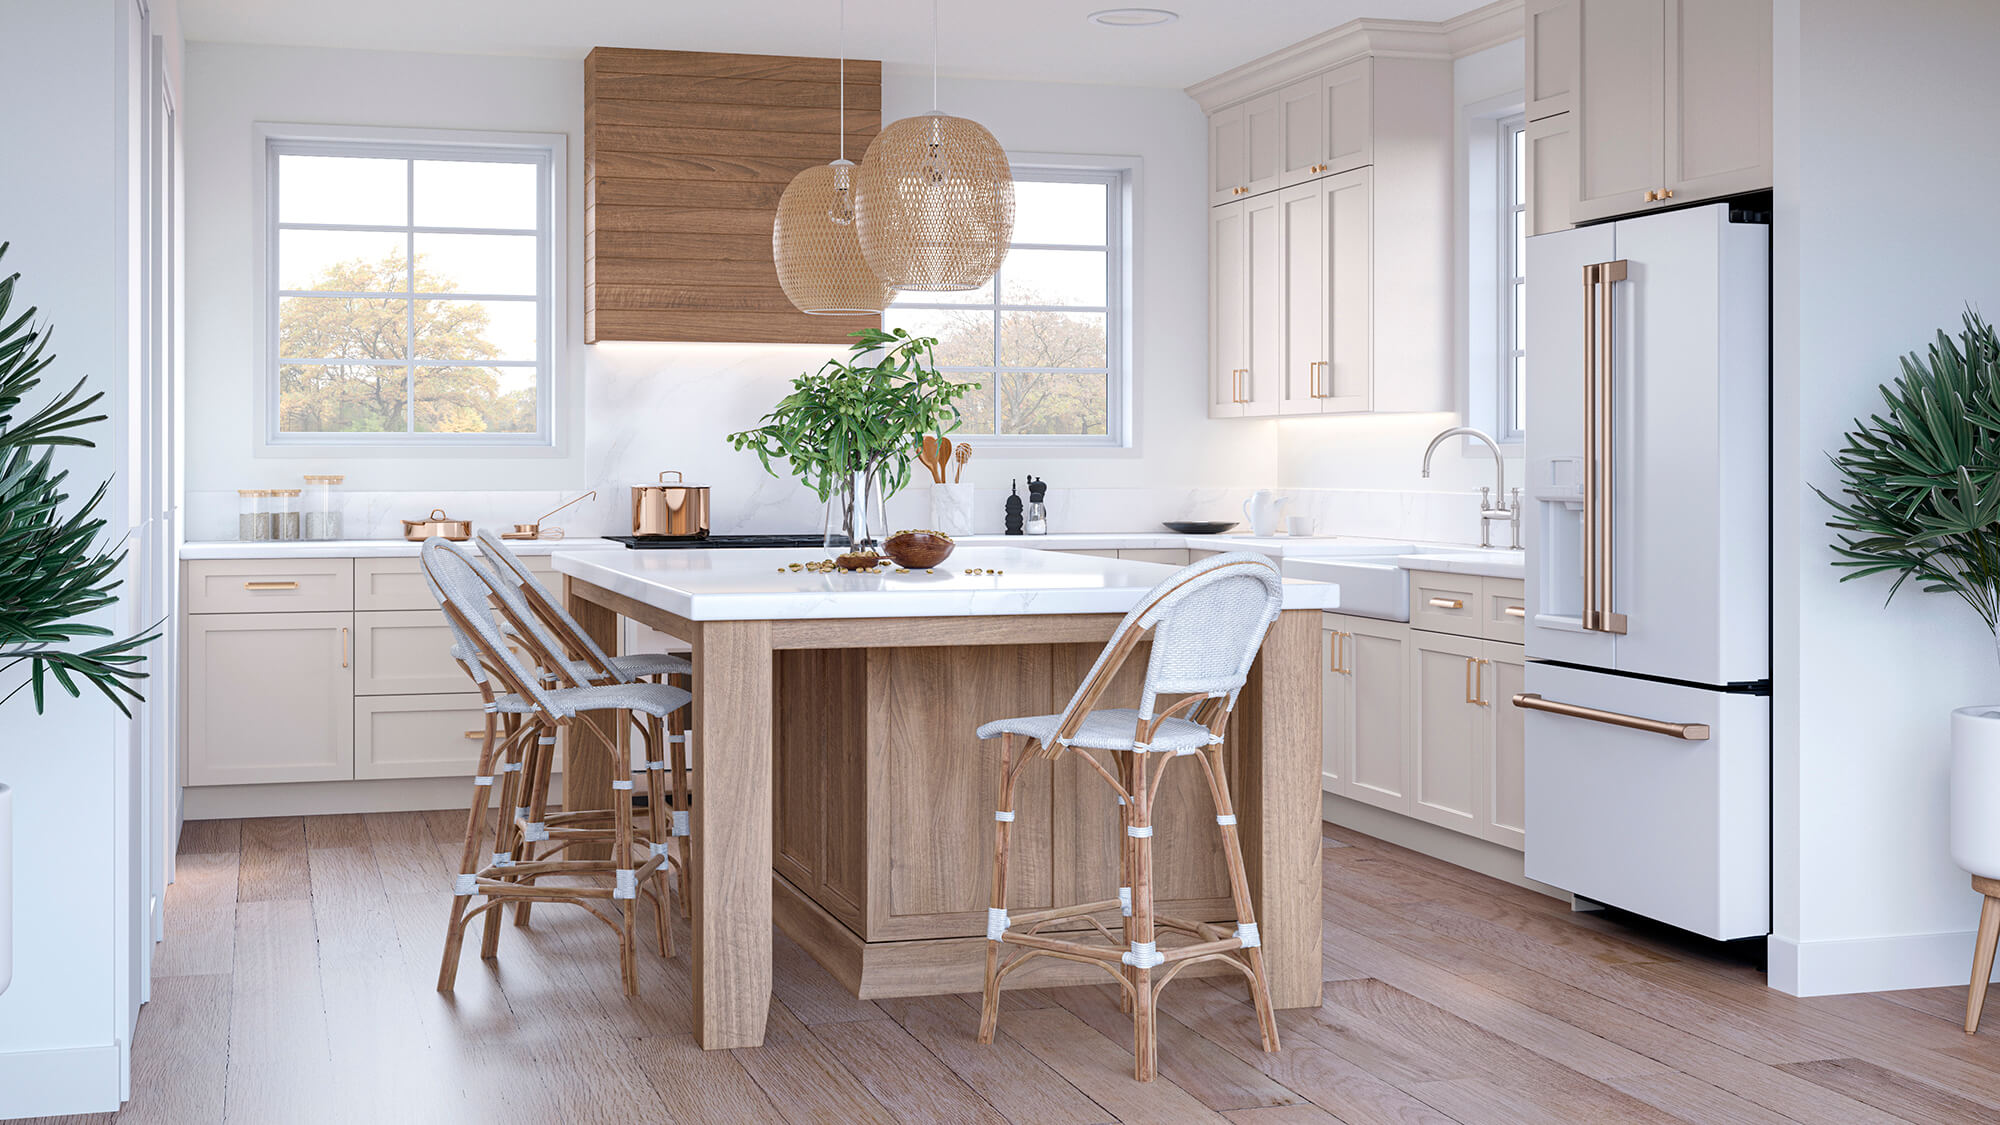 A beautiful kitchen design with light airy colors and a well-designed neautral color palette.